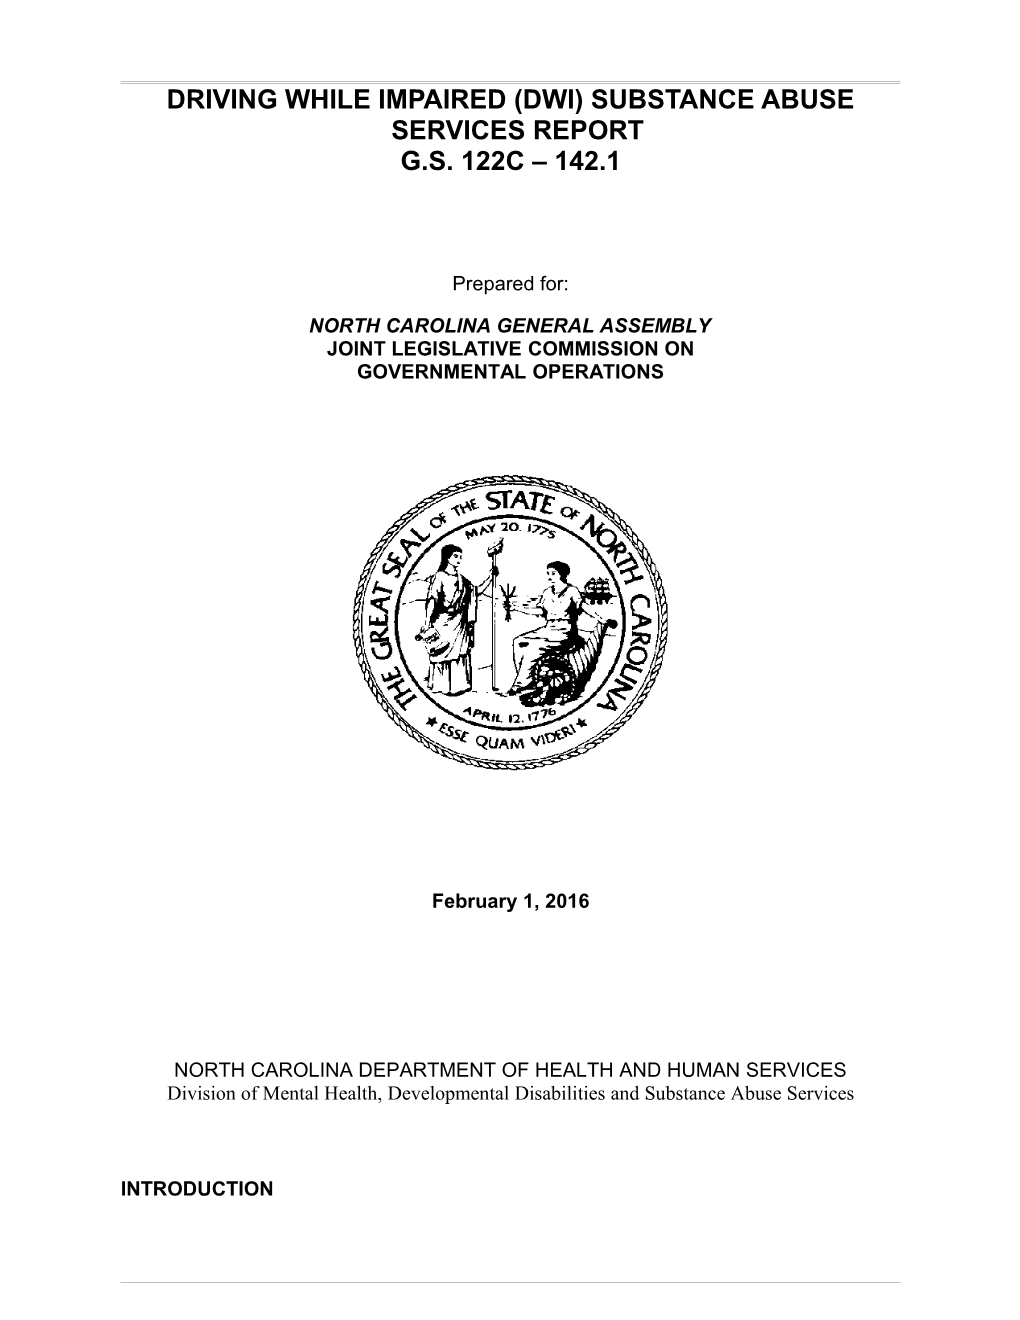 North Carolina Department of Health and Human Services s1